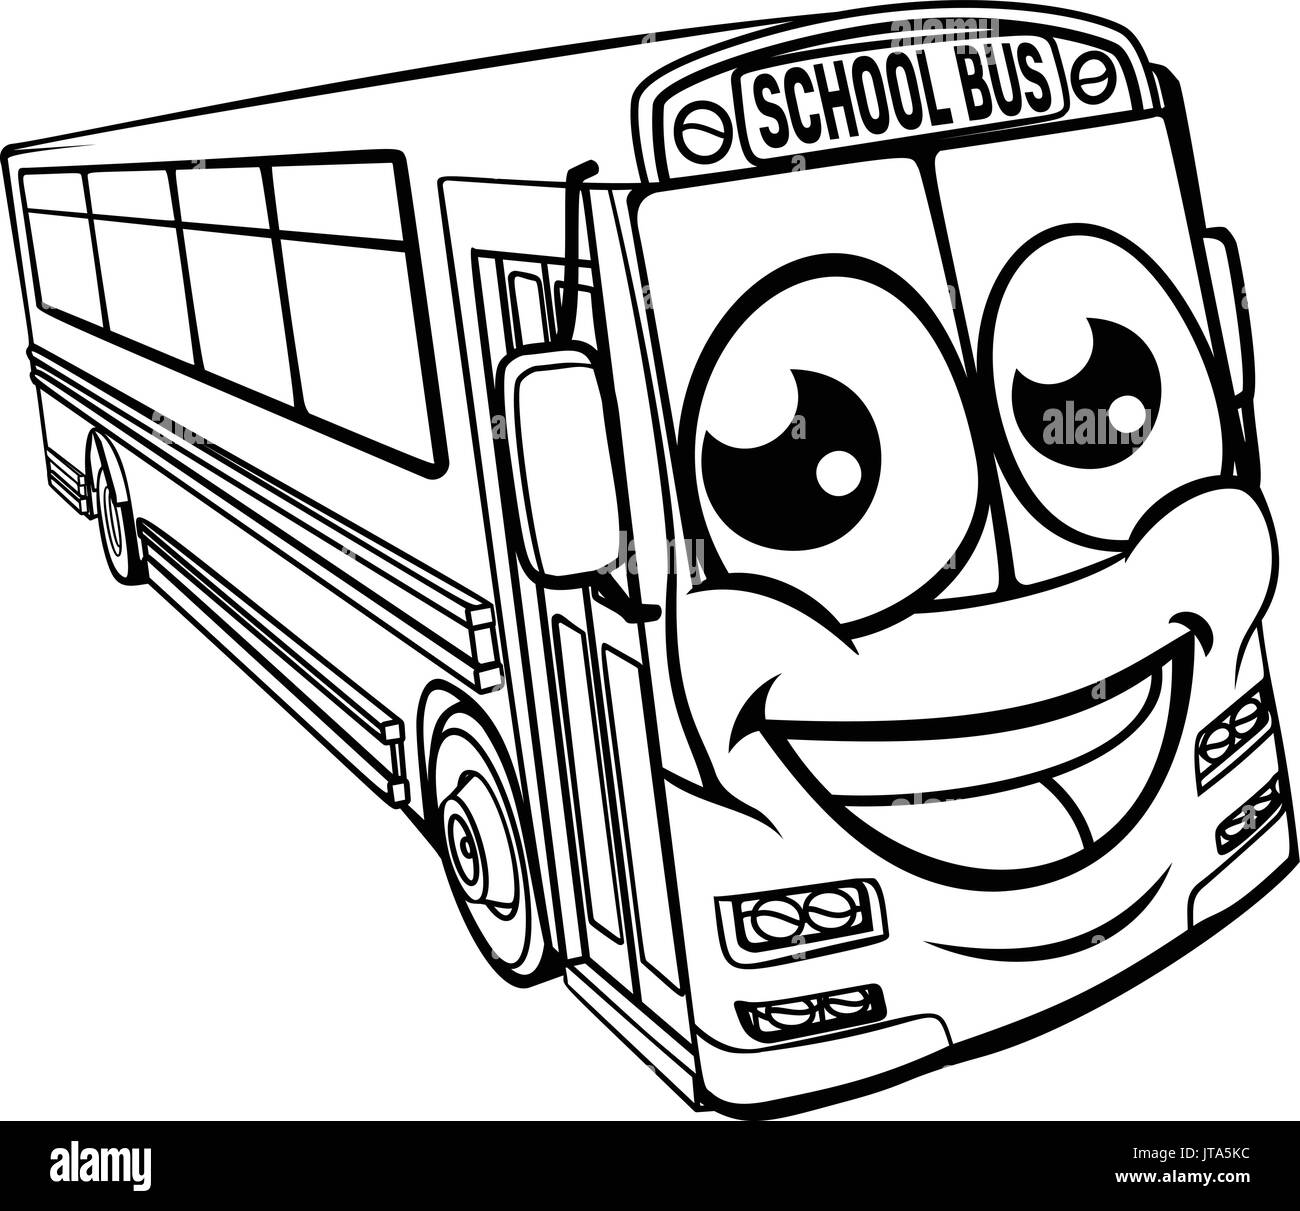 School bus Black and White Stock Photos & Images - Alamy